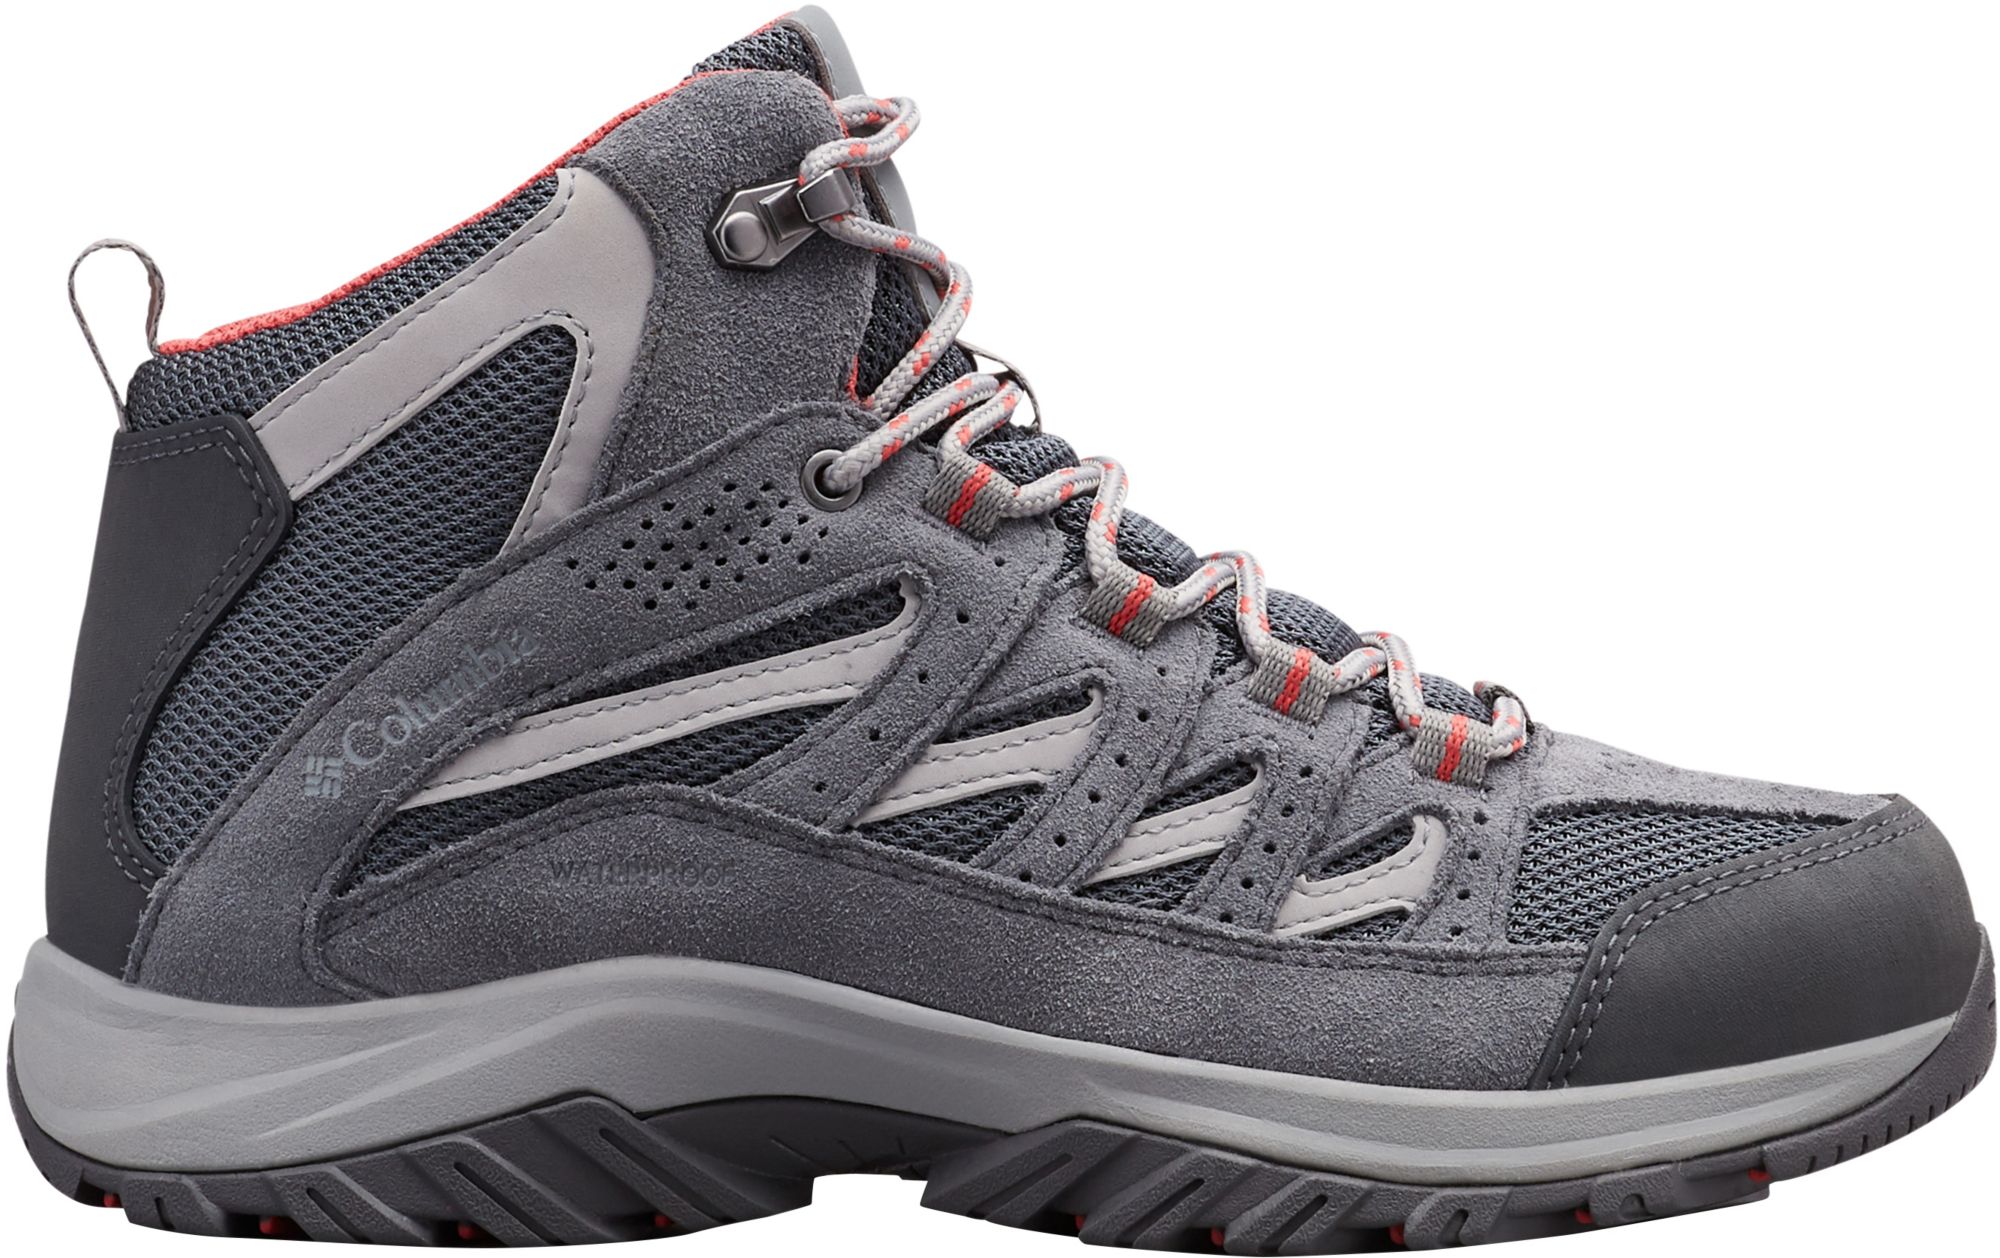 Photos - Trekking Shoes Columbia Women's Crestwood Mid Waterproof Hiking Boots, Size 7.5, Graphite 